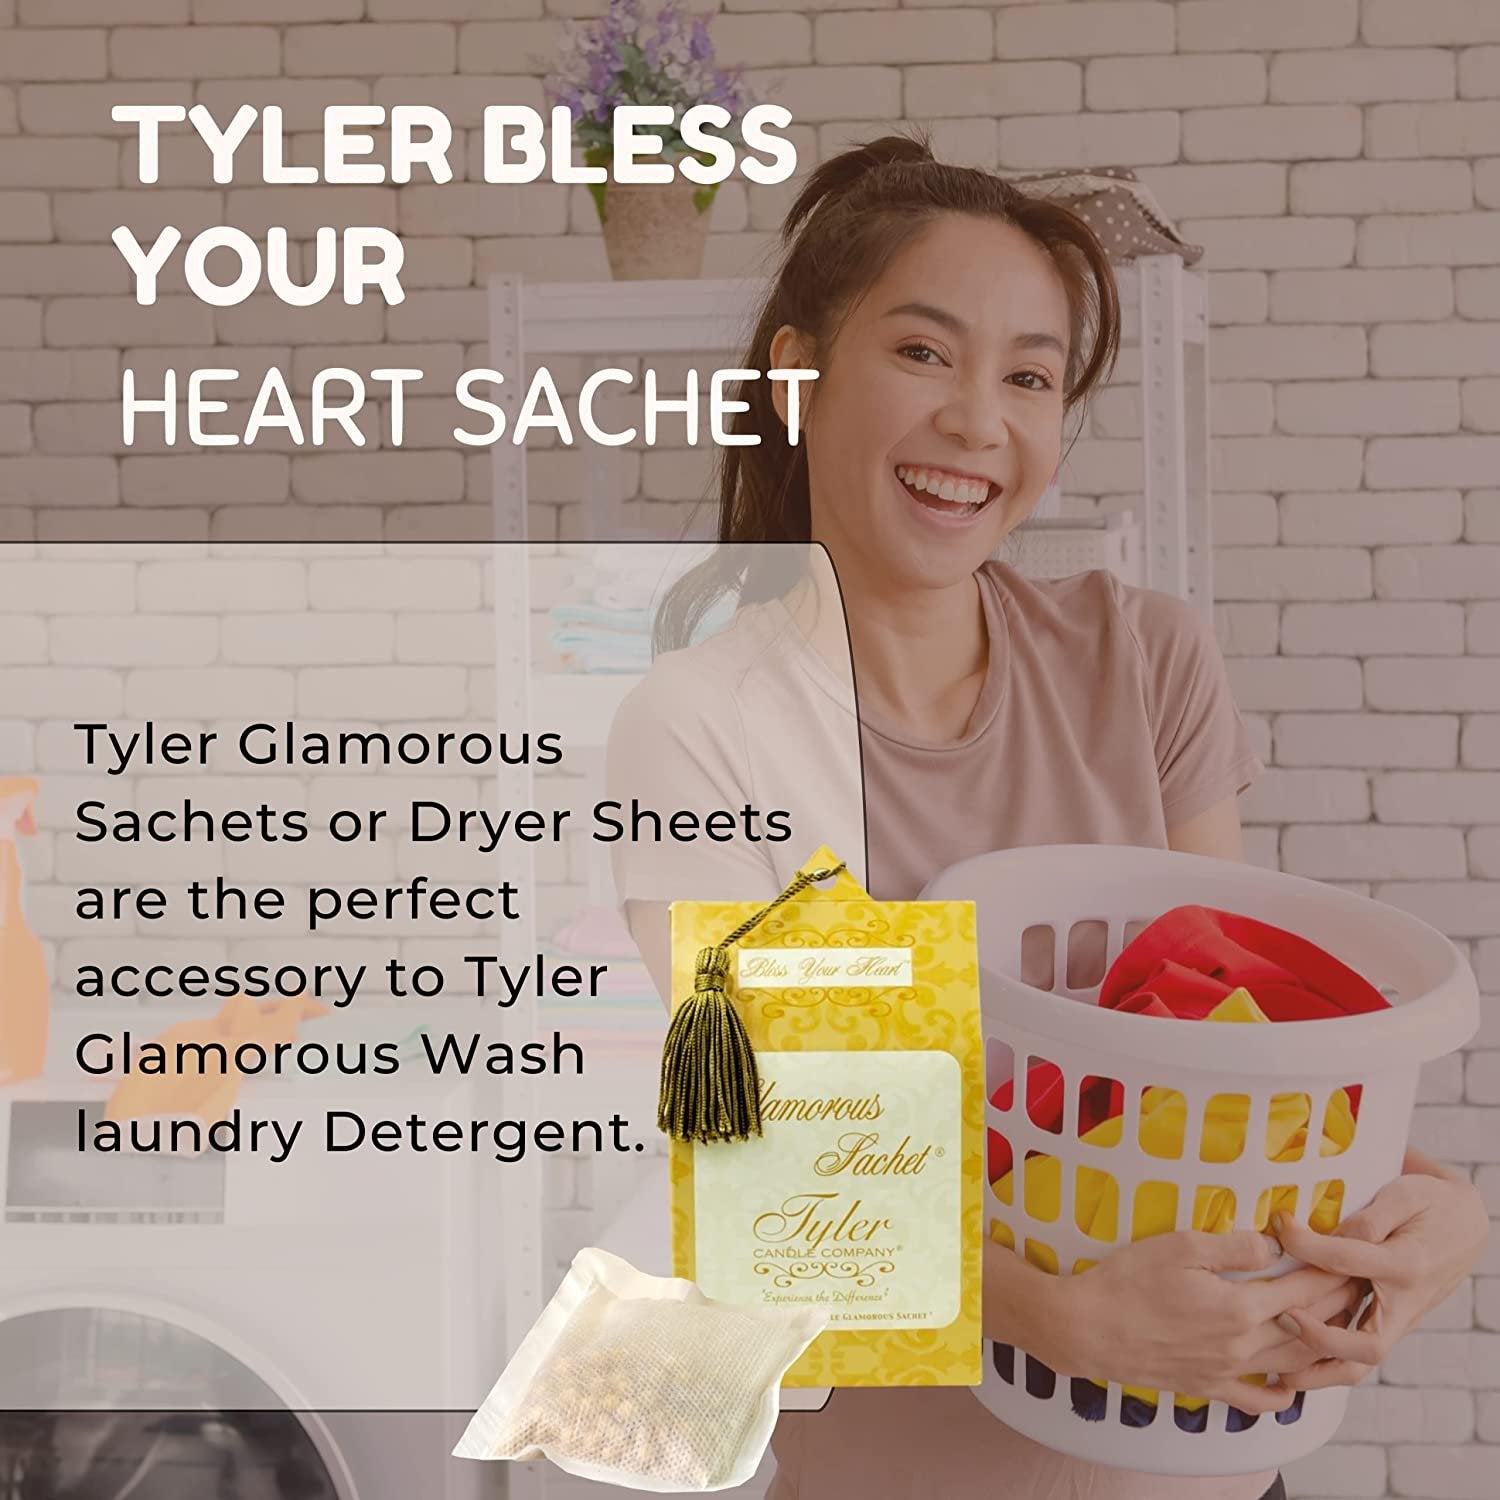 Tyler Candle Company Bless Your Heart Dryer Sheet Sachets - Glamorous Reusable Dryer Sheets - Sachets for Drawers and Closets - 2 Pack of 4 Sachets, Dryer, Home, or Personal Sachet, w Bonus Key Chain